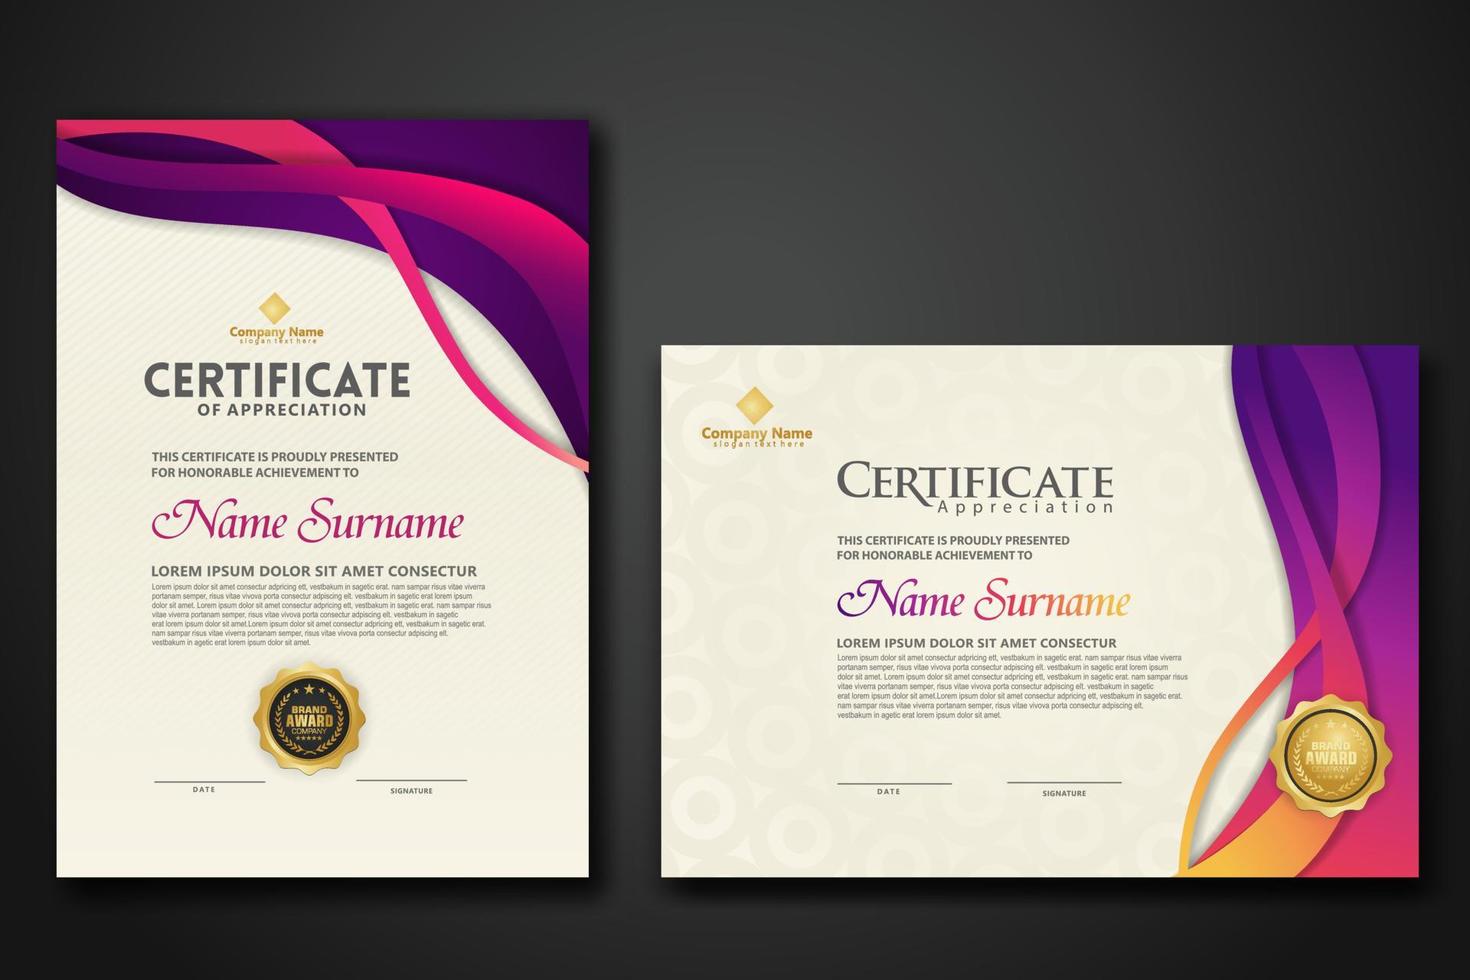 Two set certificate template with dynamic and futuristic wave modern background vector